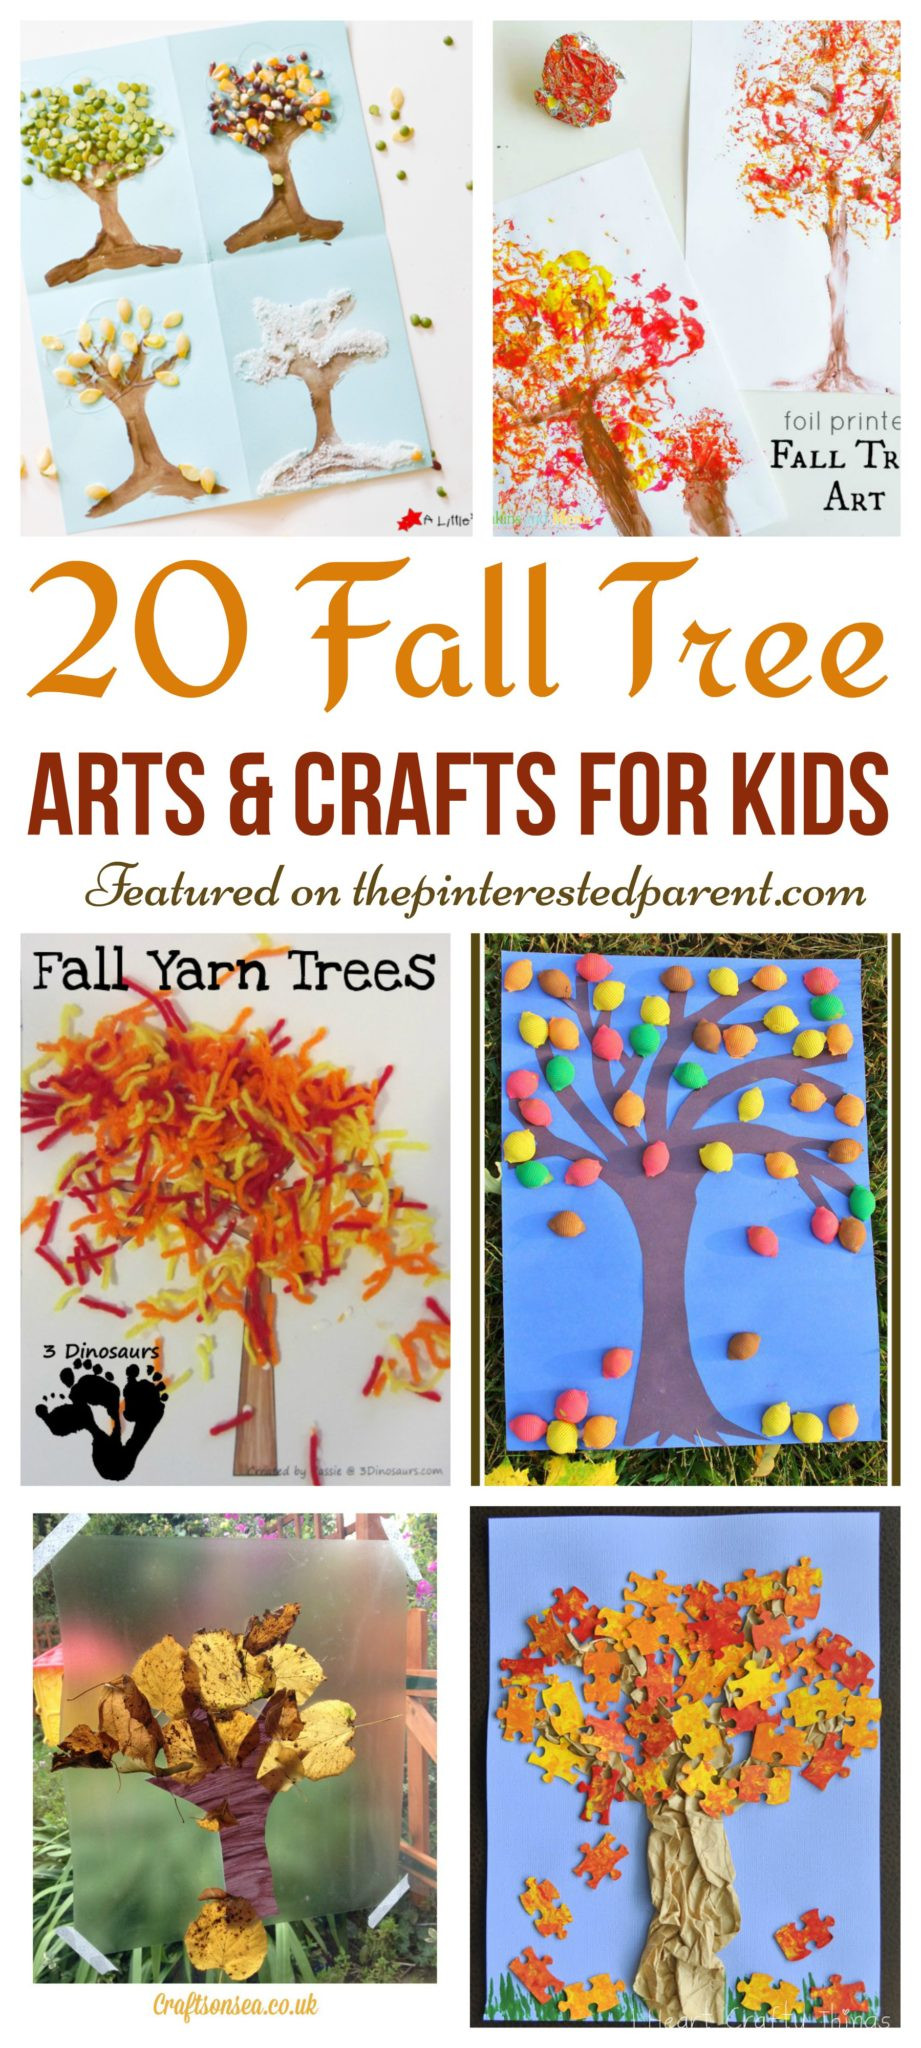 Preschoolers Art And Craft
 20 Fall Tree Arts & Crafts Ideas For Kids – The